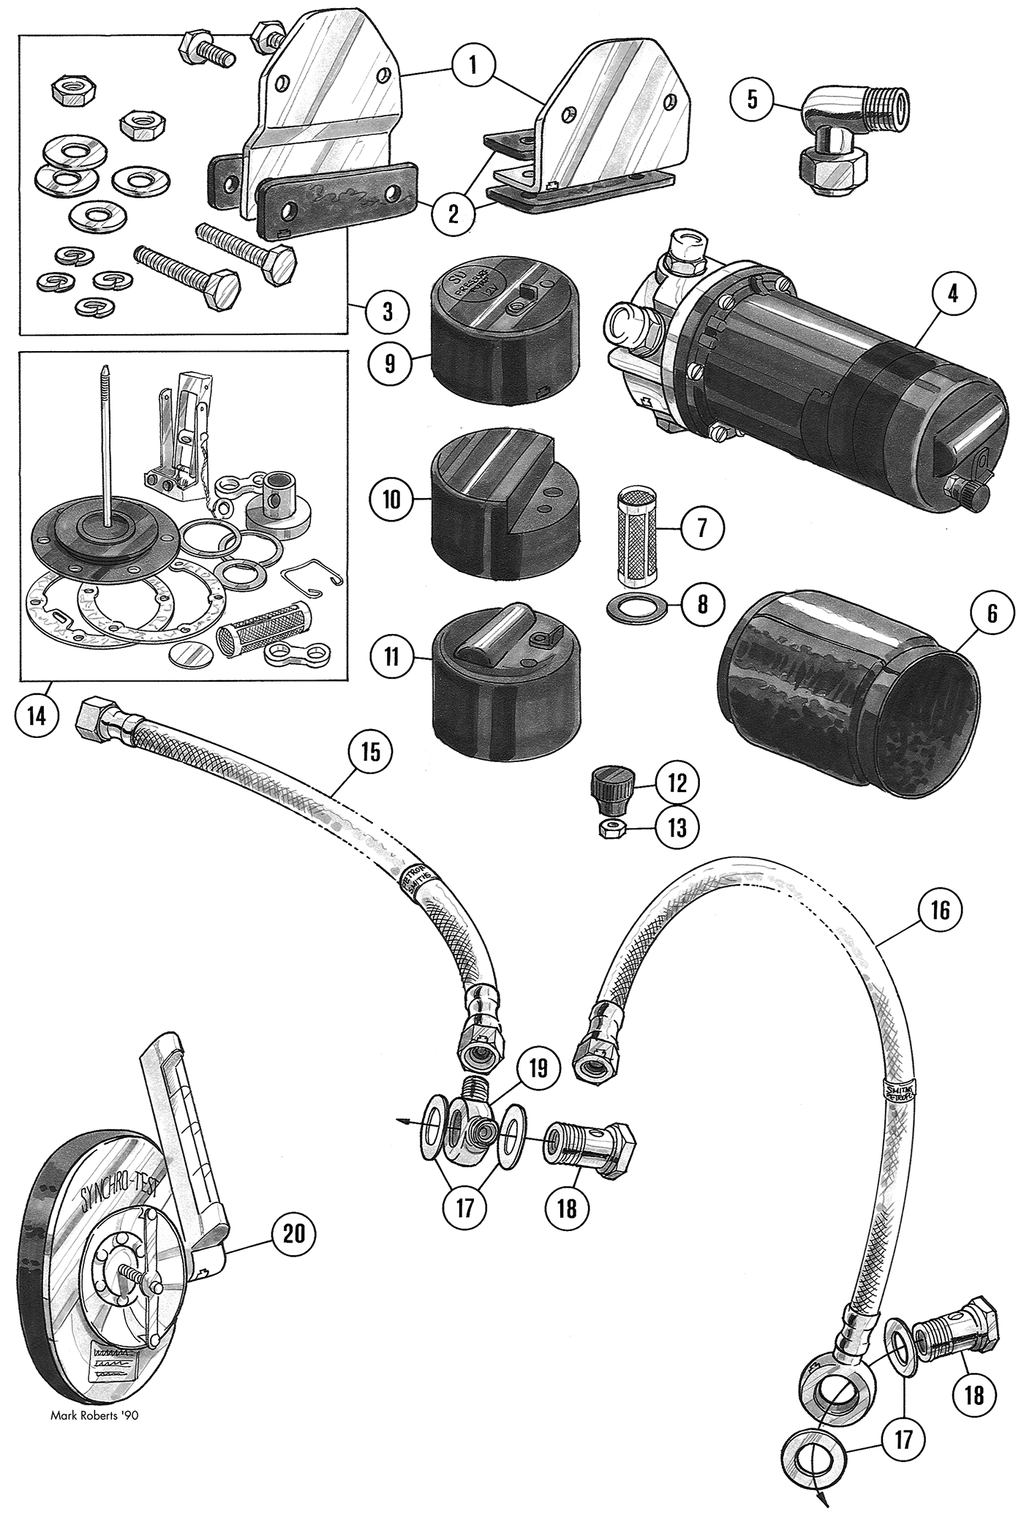 MGTD-TF 1949-1955 - Knobs, buttons & switches - Fuel pump & flexibles - 1